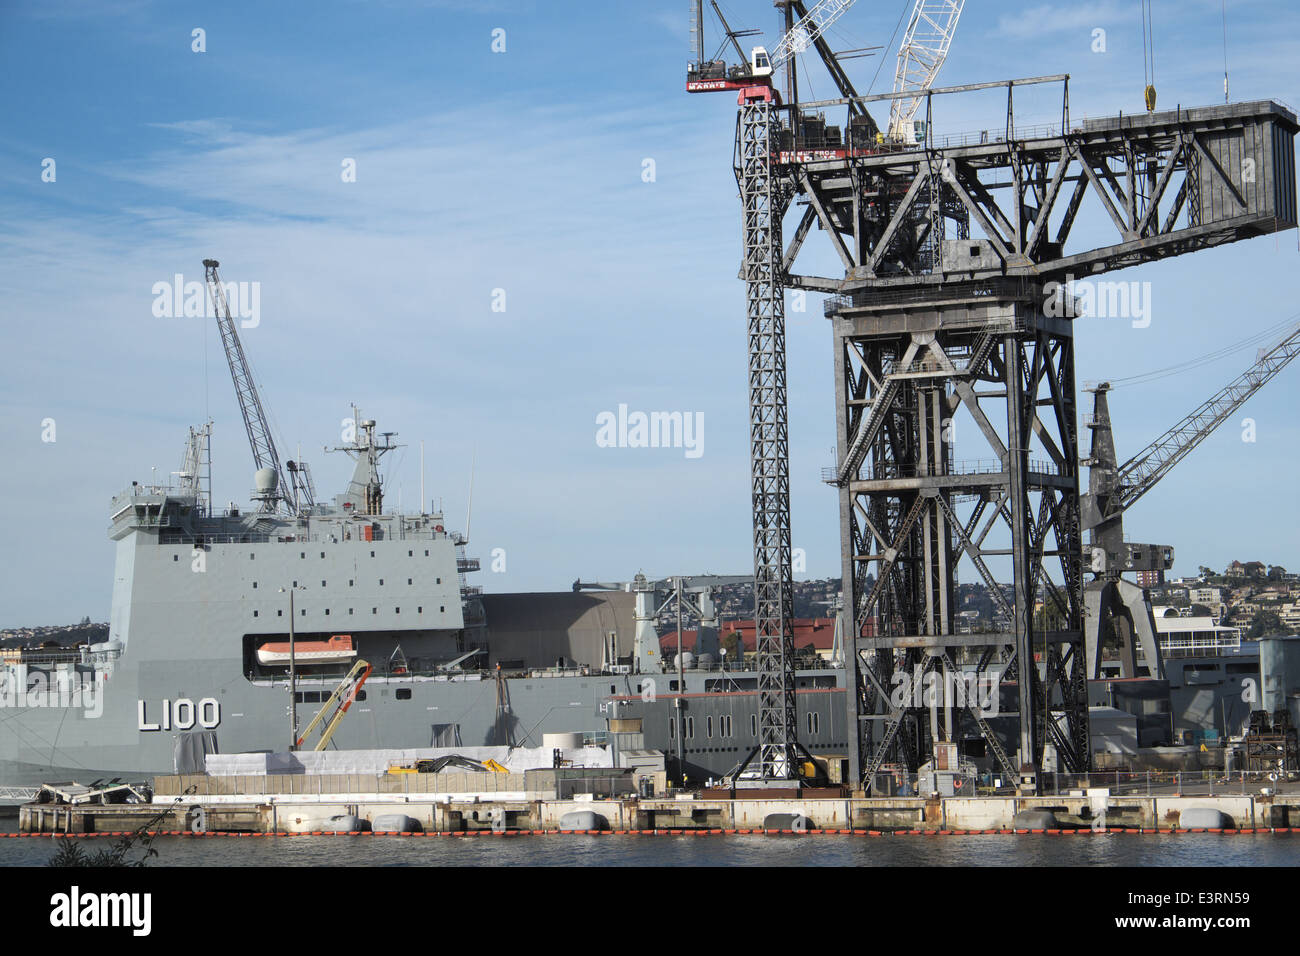 Hammerhead crane now being pulled down, at Sydney's Royal Australian Navy Garden island naval base,New South Wales,Australia Stock Photo